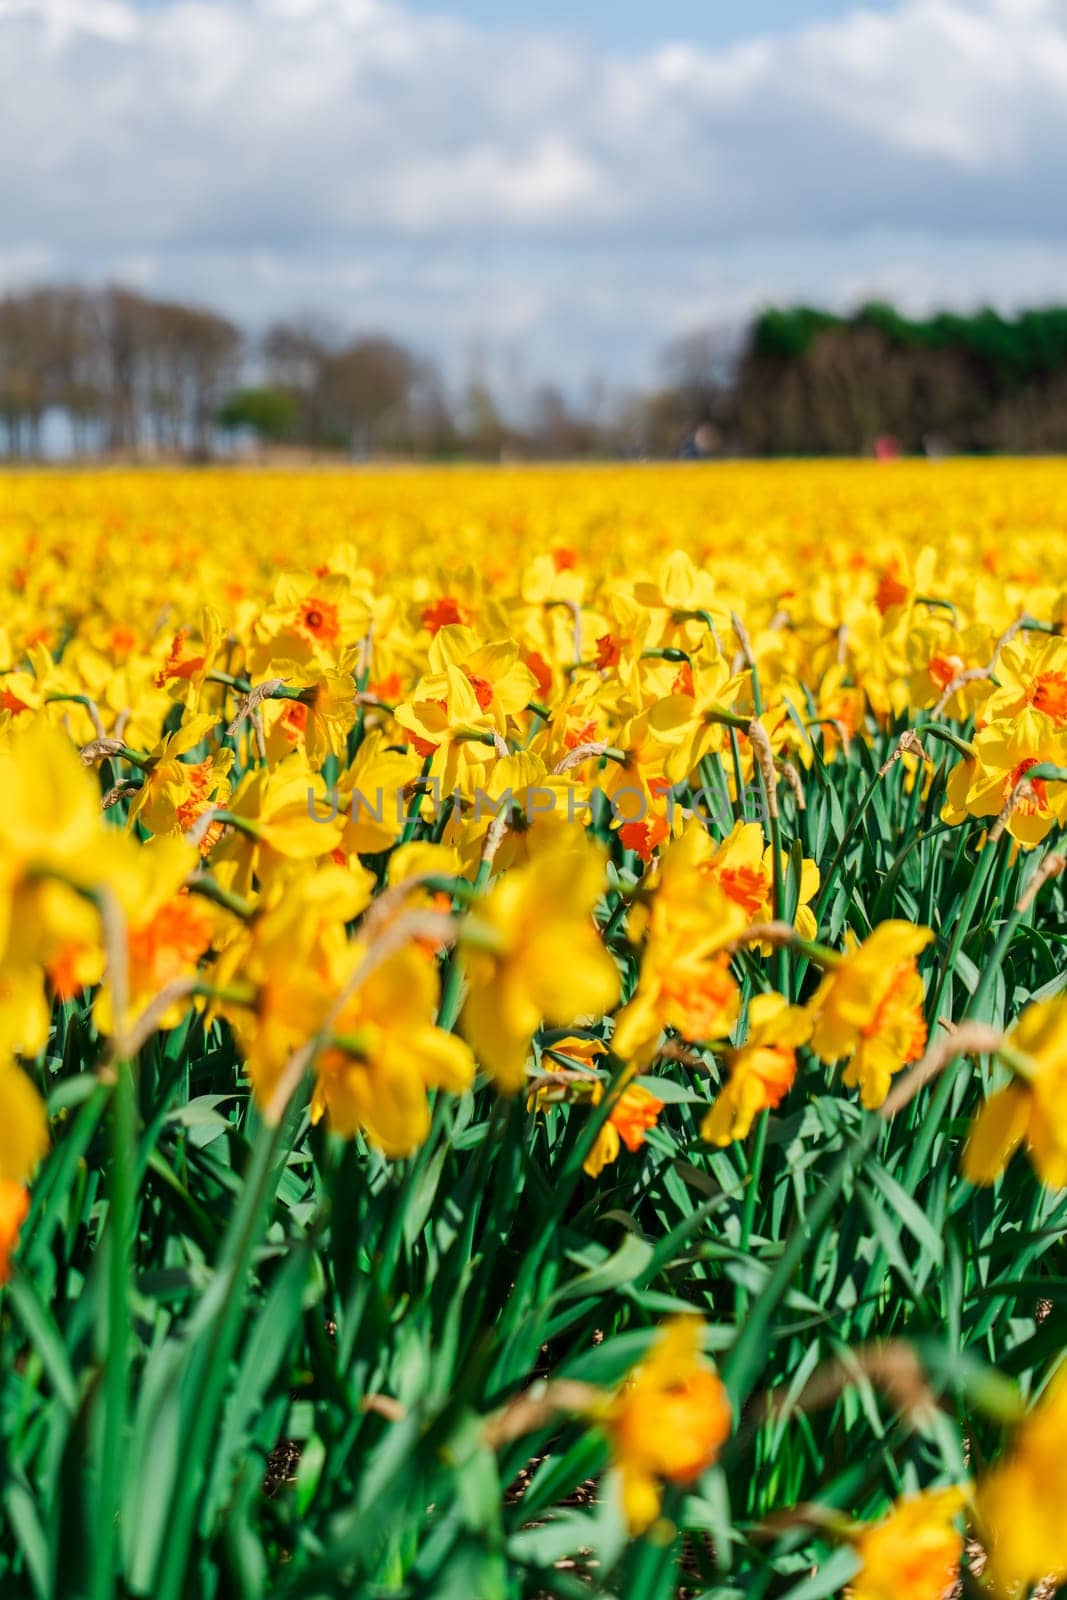 Experience the breathtaking beauty of the Netherlands as it showcases a spectacular scene with its vast field adorned with stunning yellow daffodils in full bloom during the month of April.